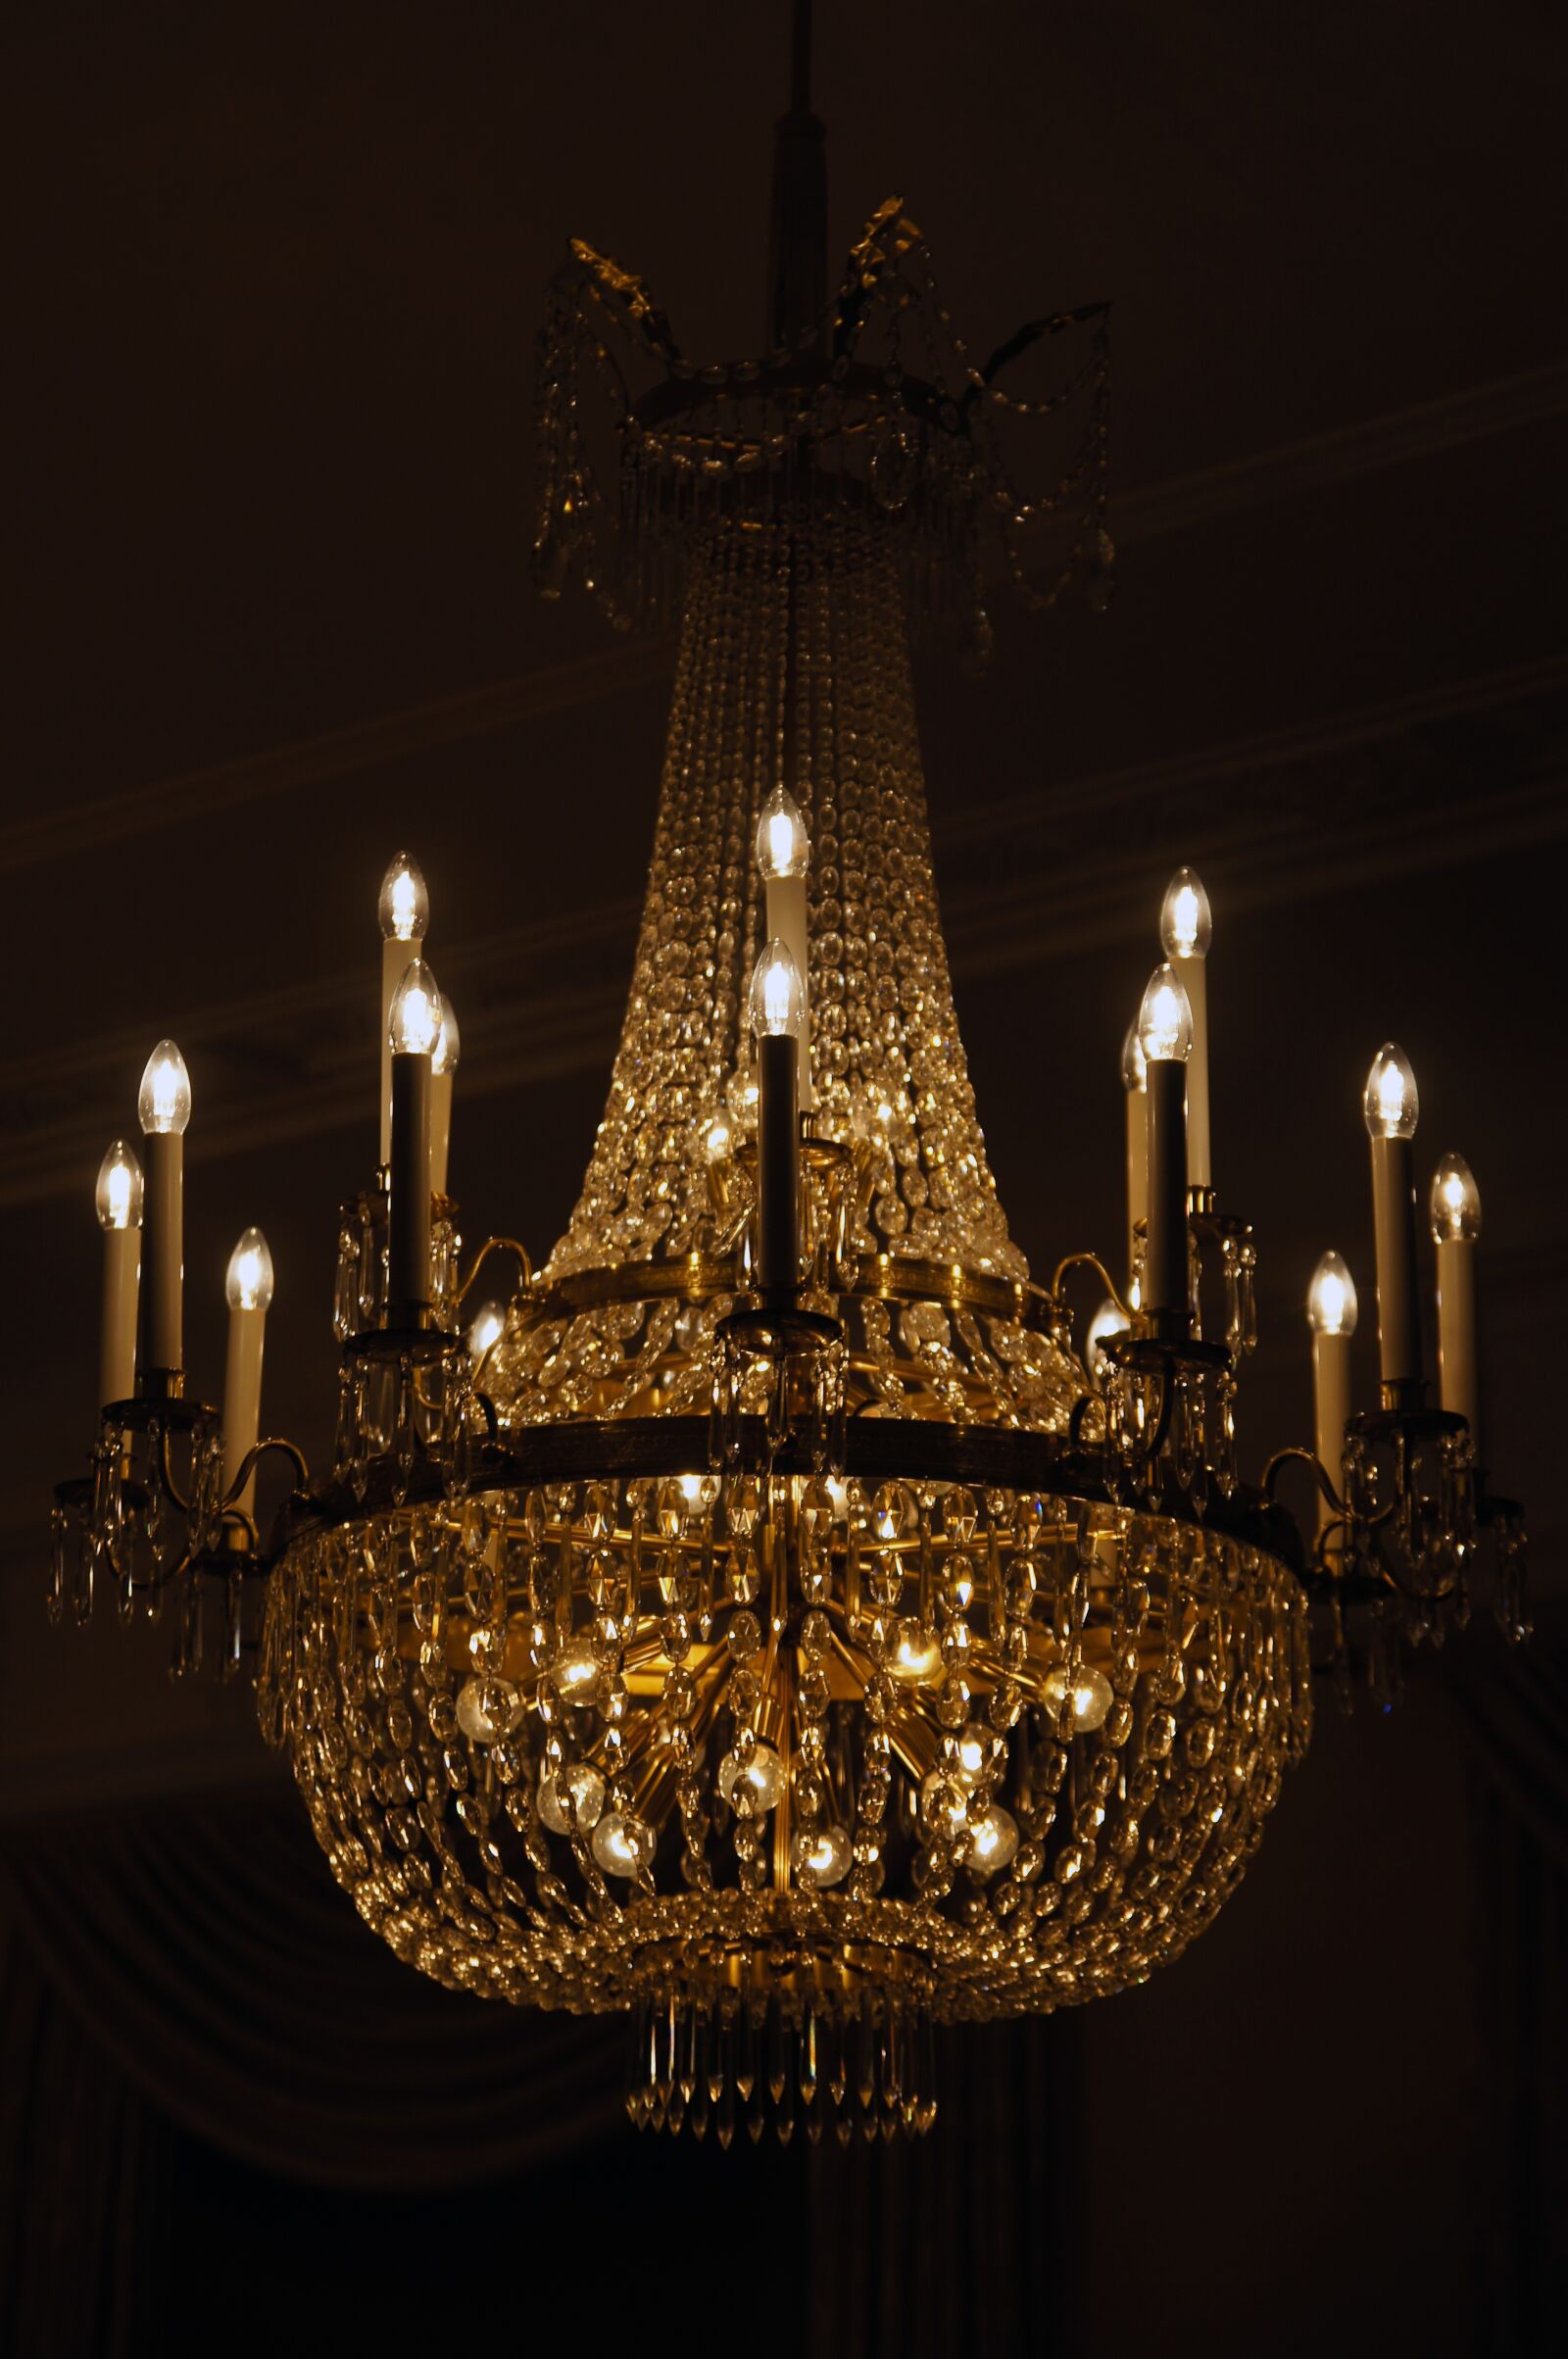 17-50mm F2.8 sample photo. Chandelier, lamp, lights photography